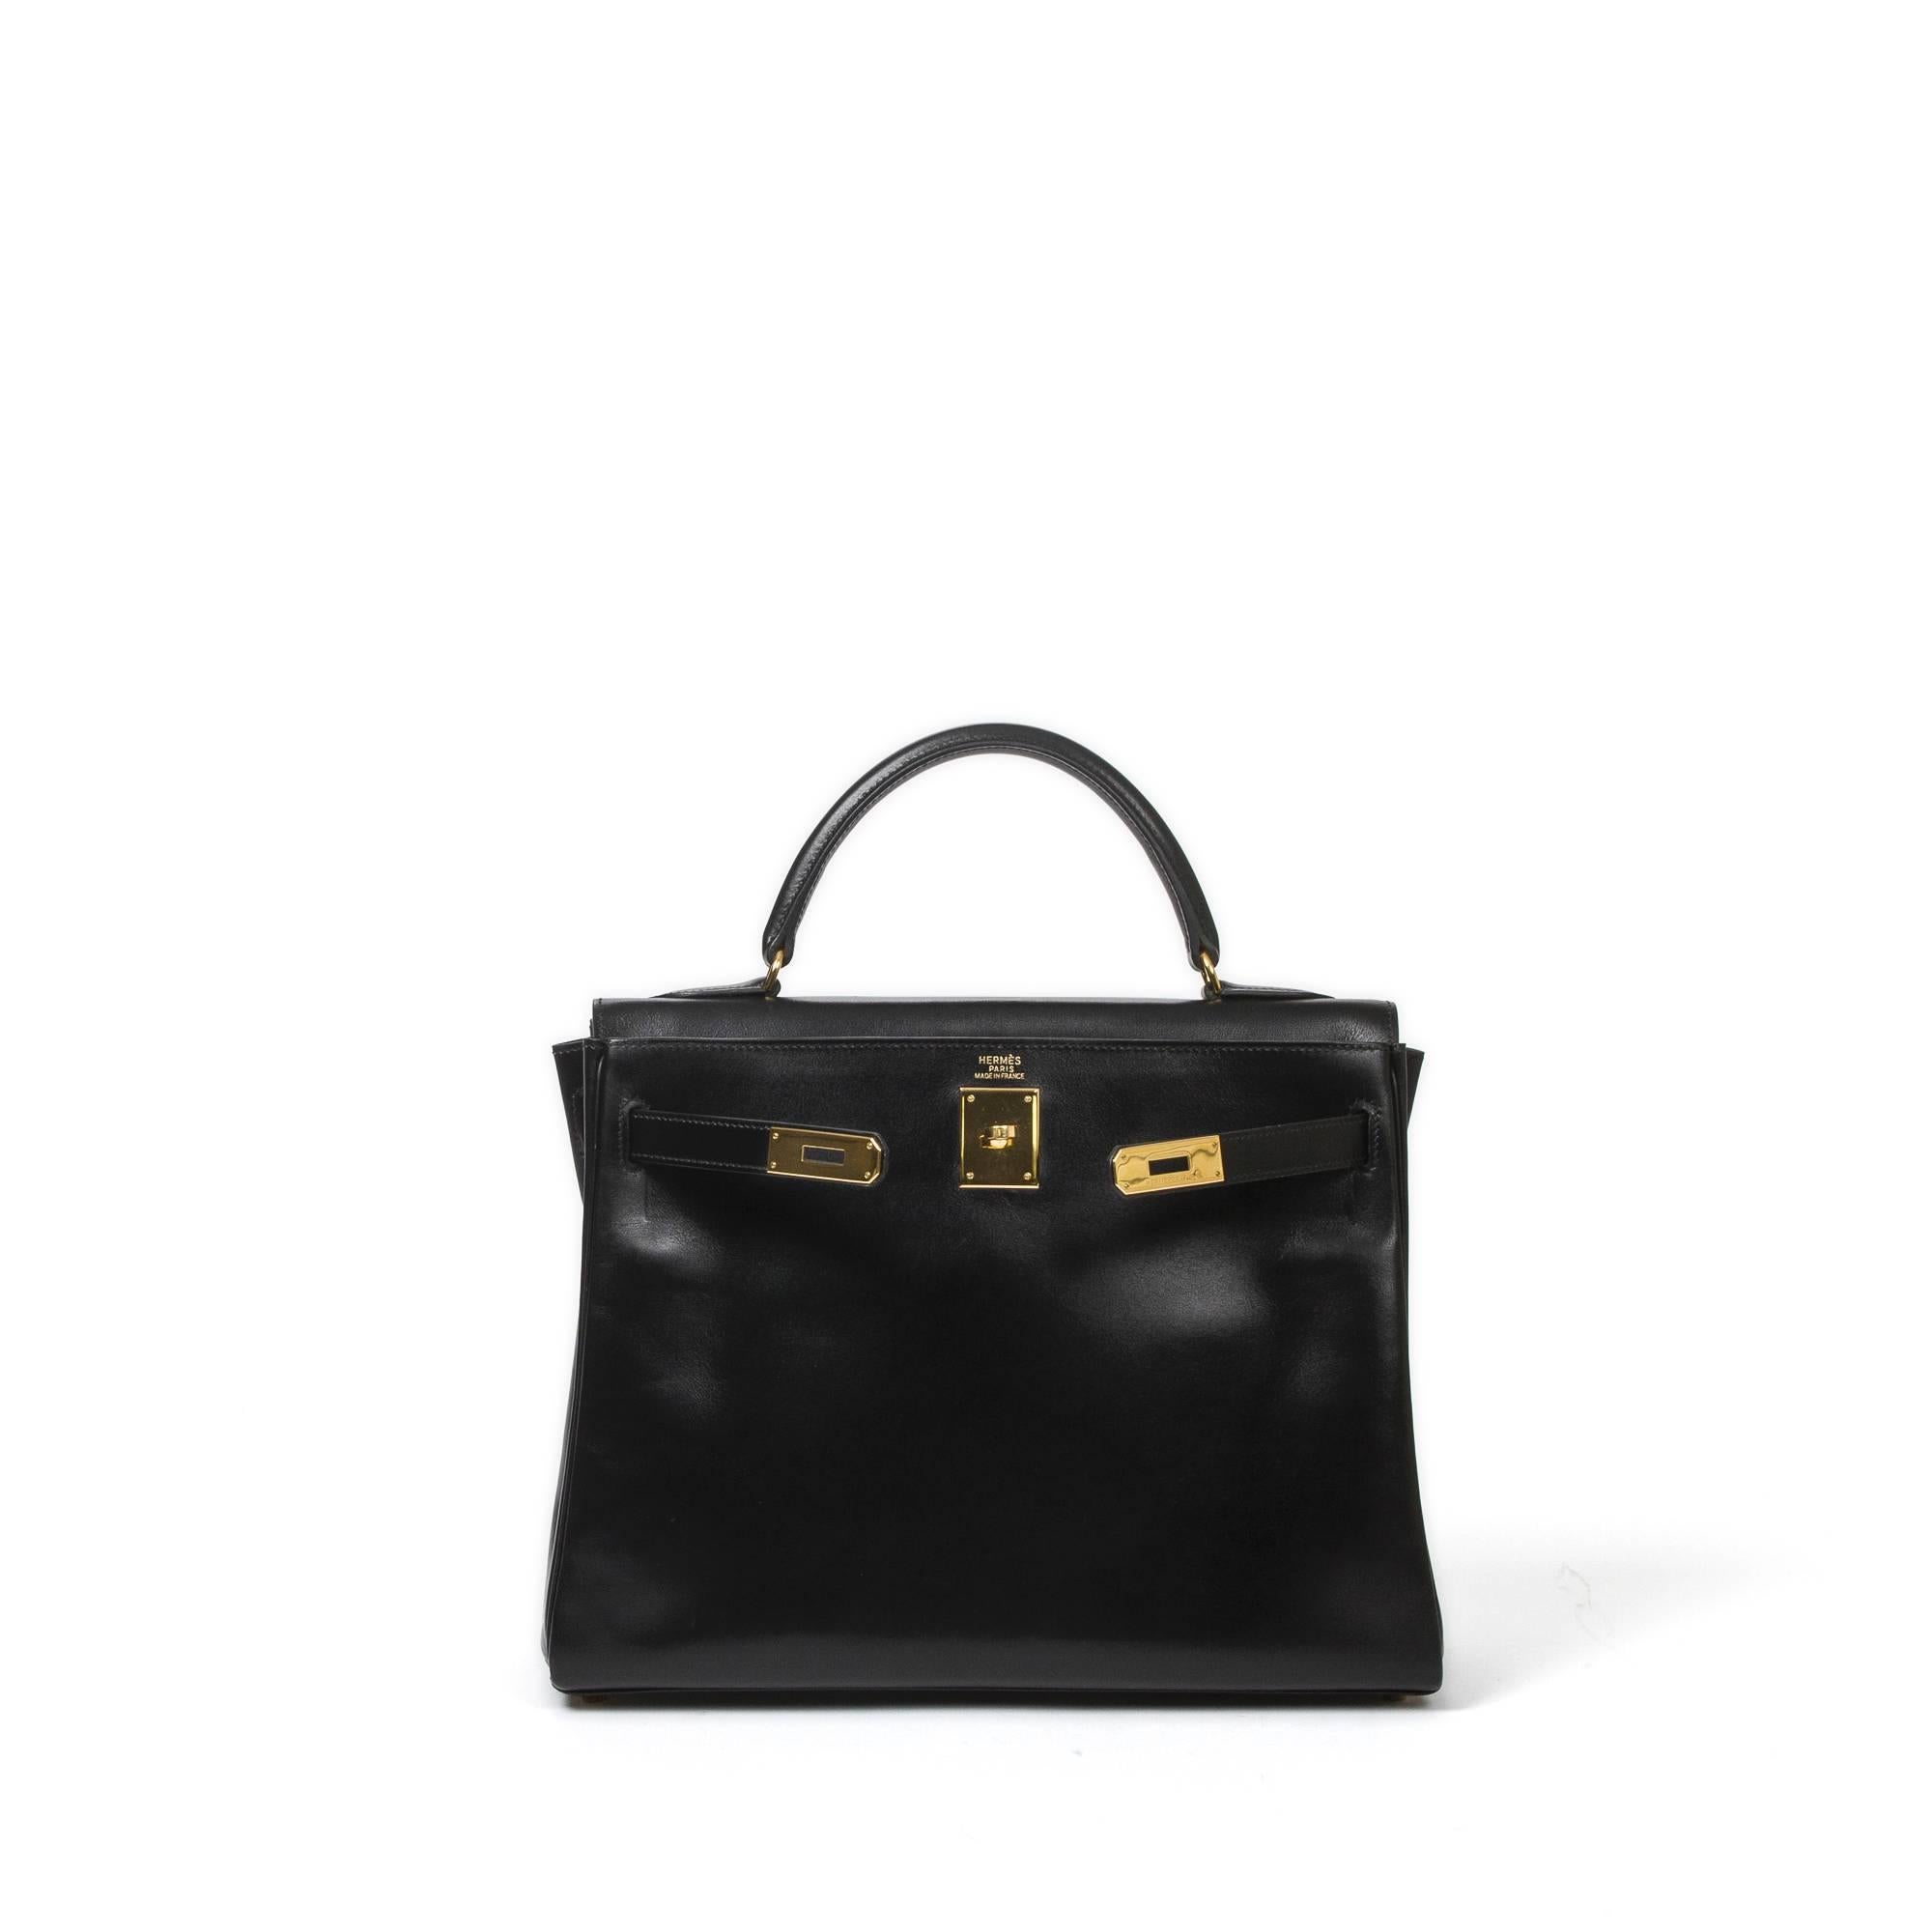 Handbag	Hermès Kelly Retourné 32cm in black box calf leather with gold tone hardware, strap (43cm), handle (8,5cm), cadenas and keys in clochette. Interior lined in black chèvre mysore leather with one zip pocket and 2 slip pockets. Stamp C in